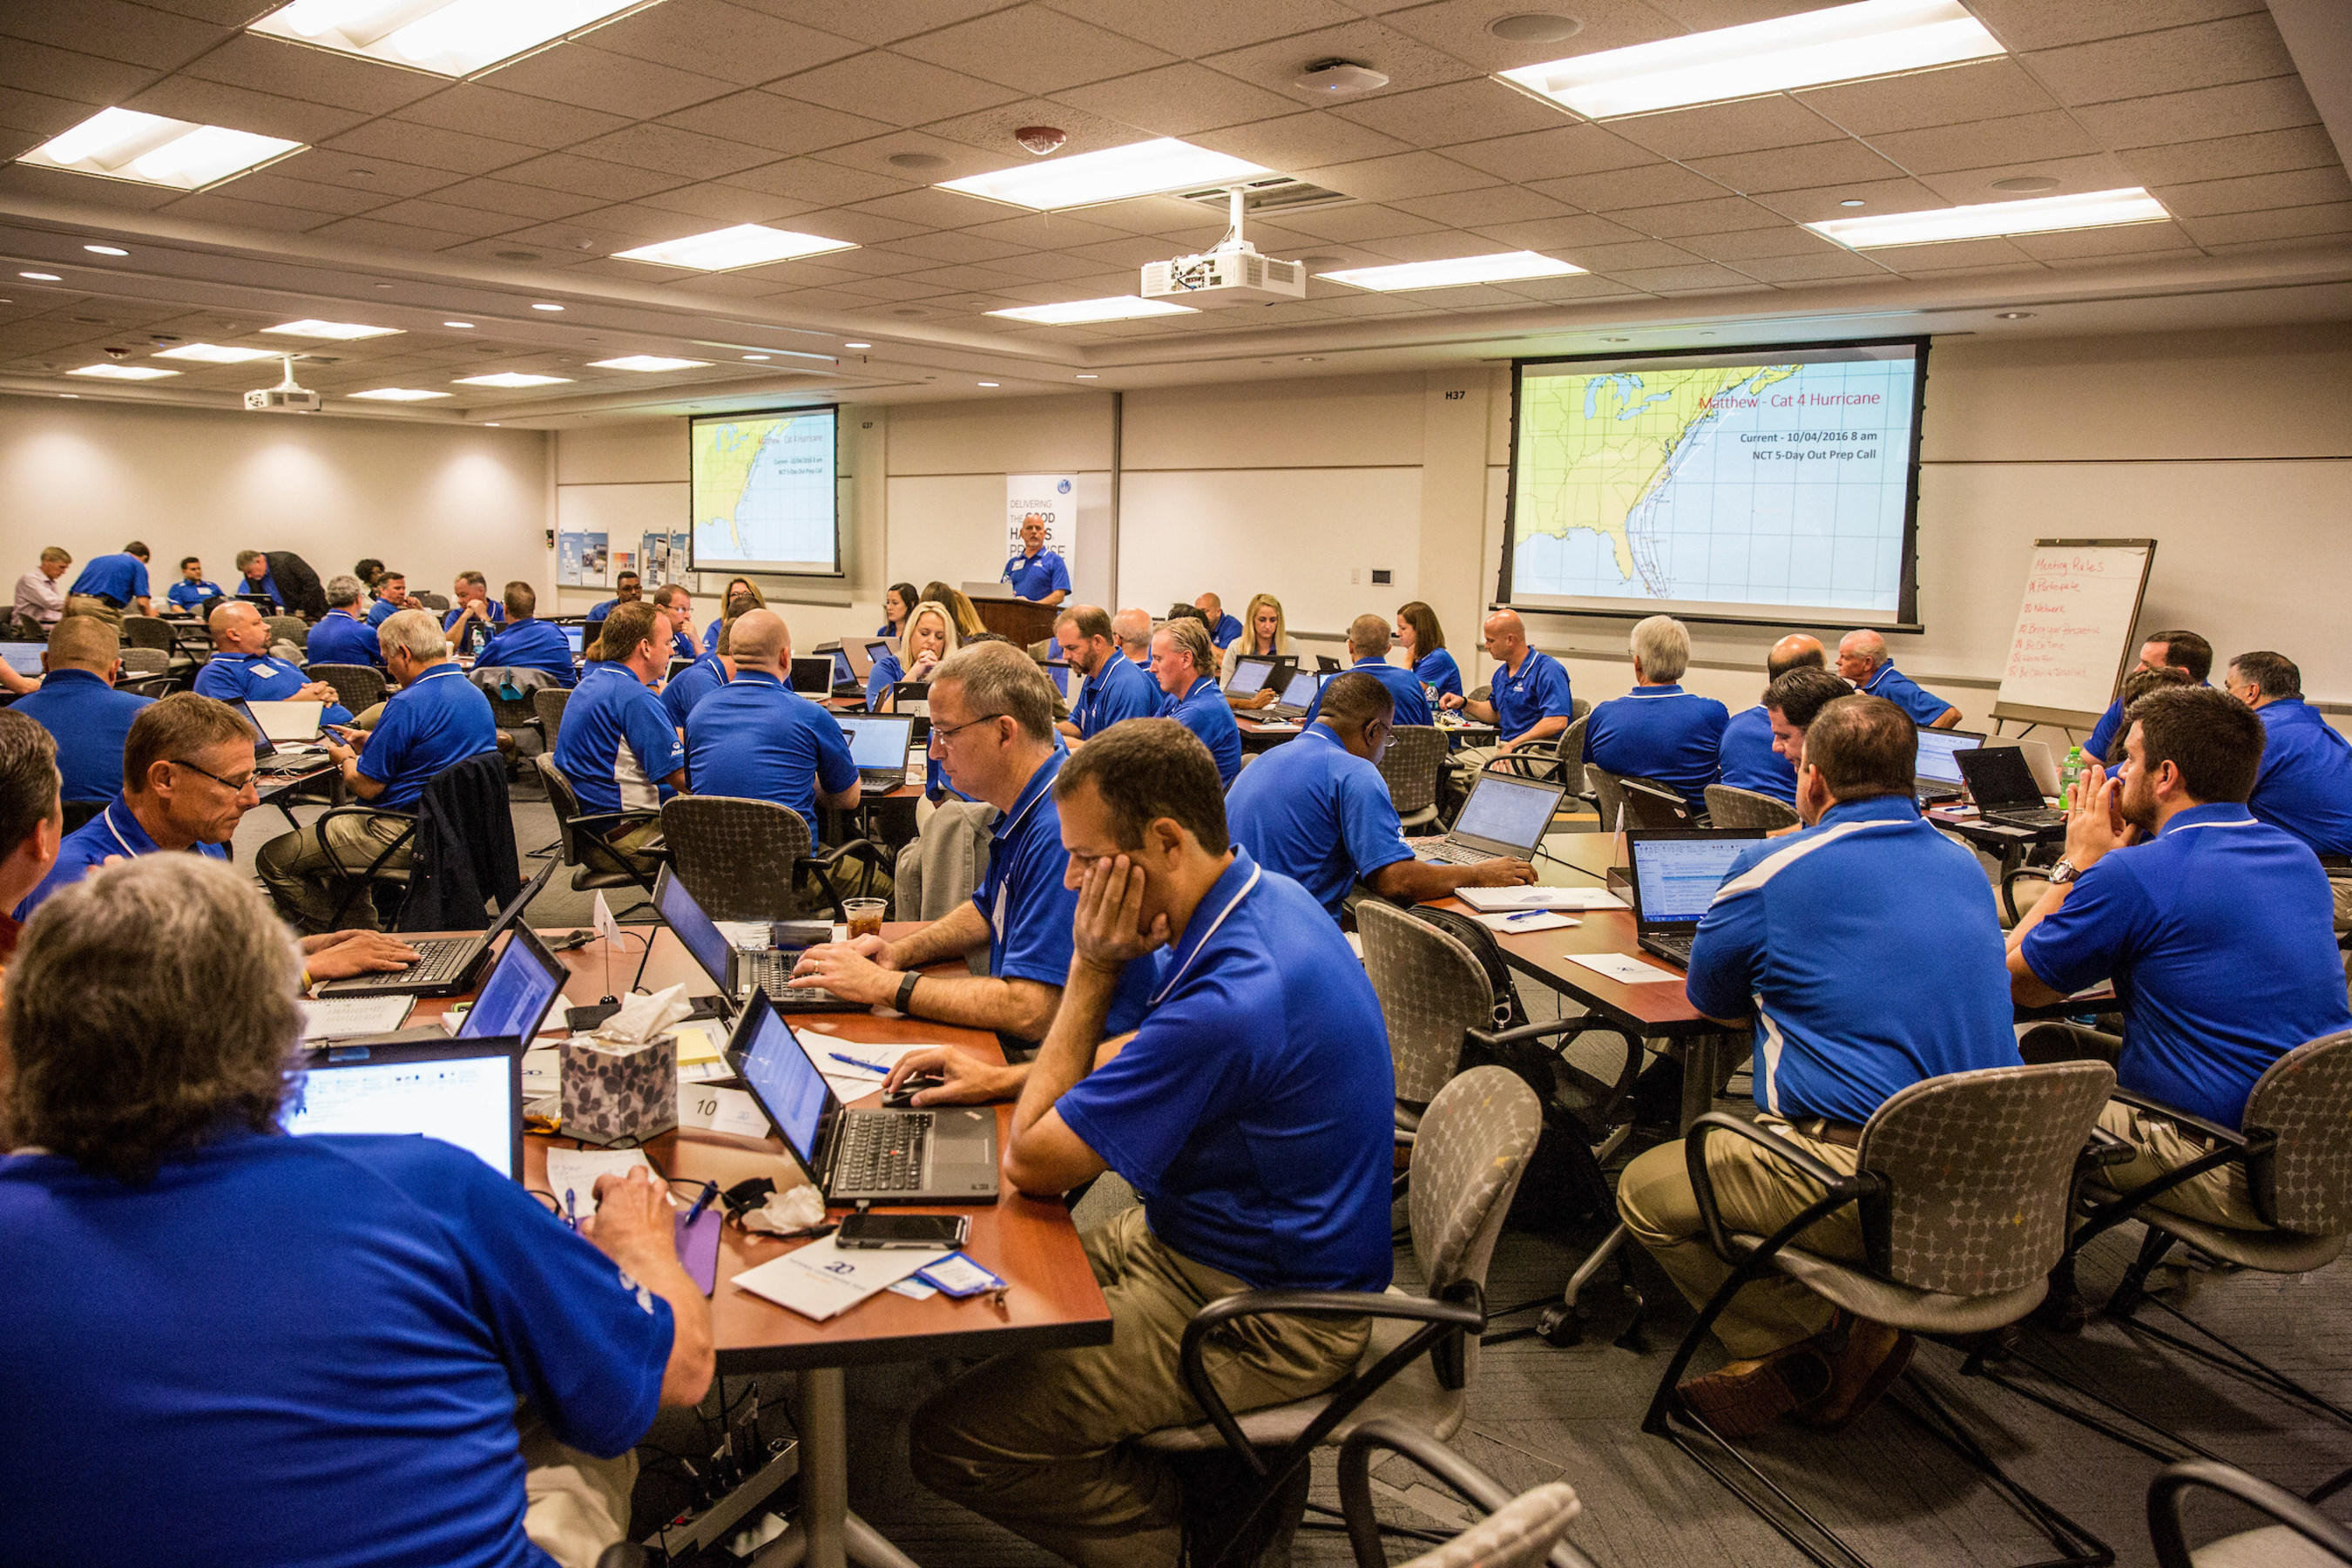 Claim personnel turn conference room into command center to prep for approaching storm